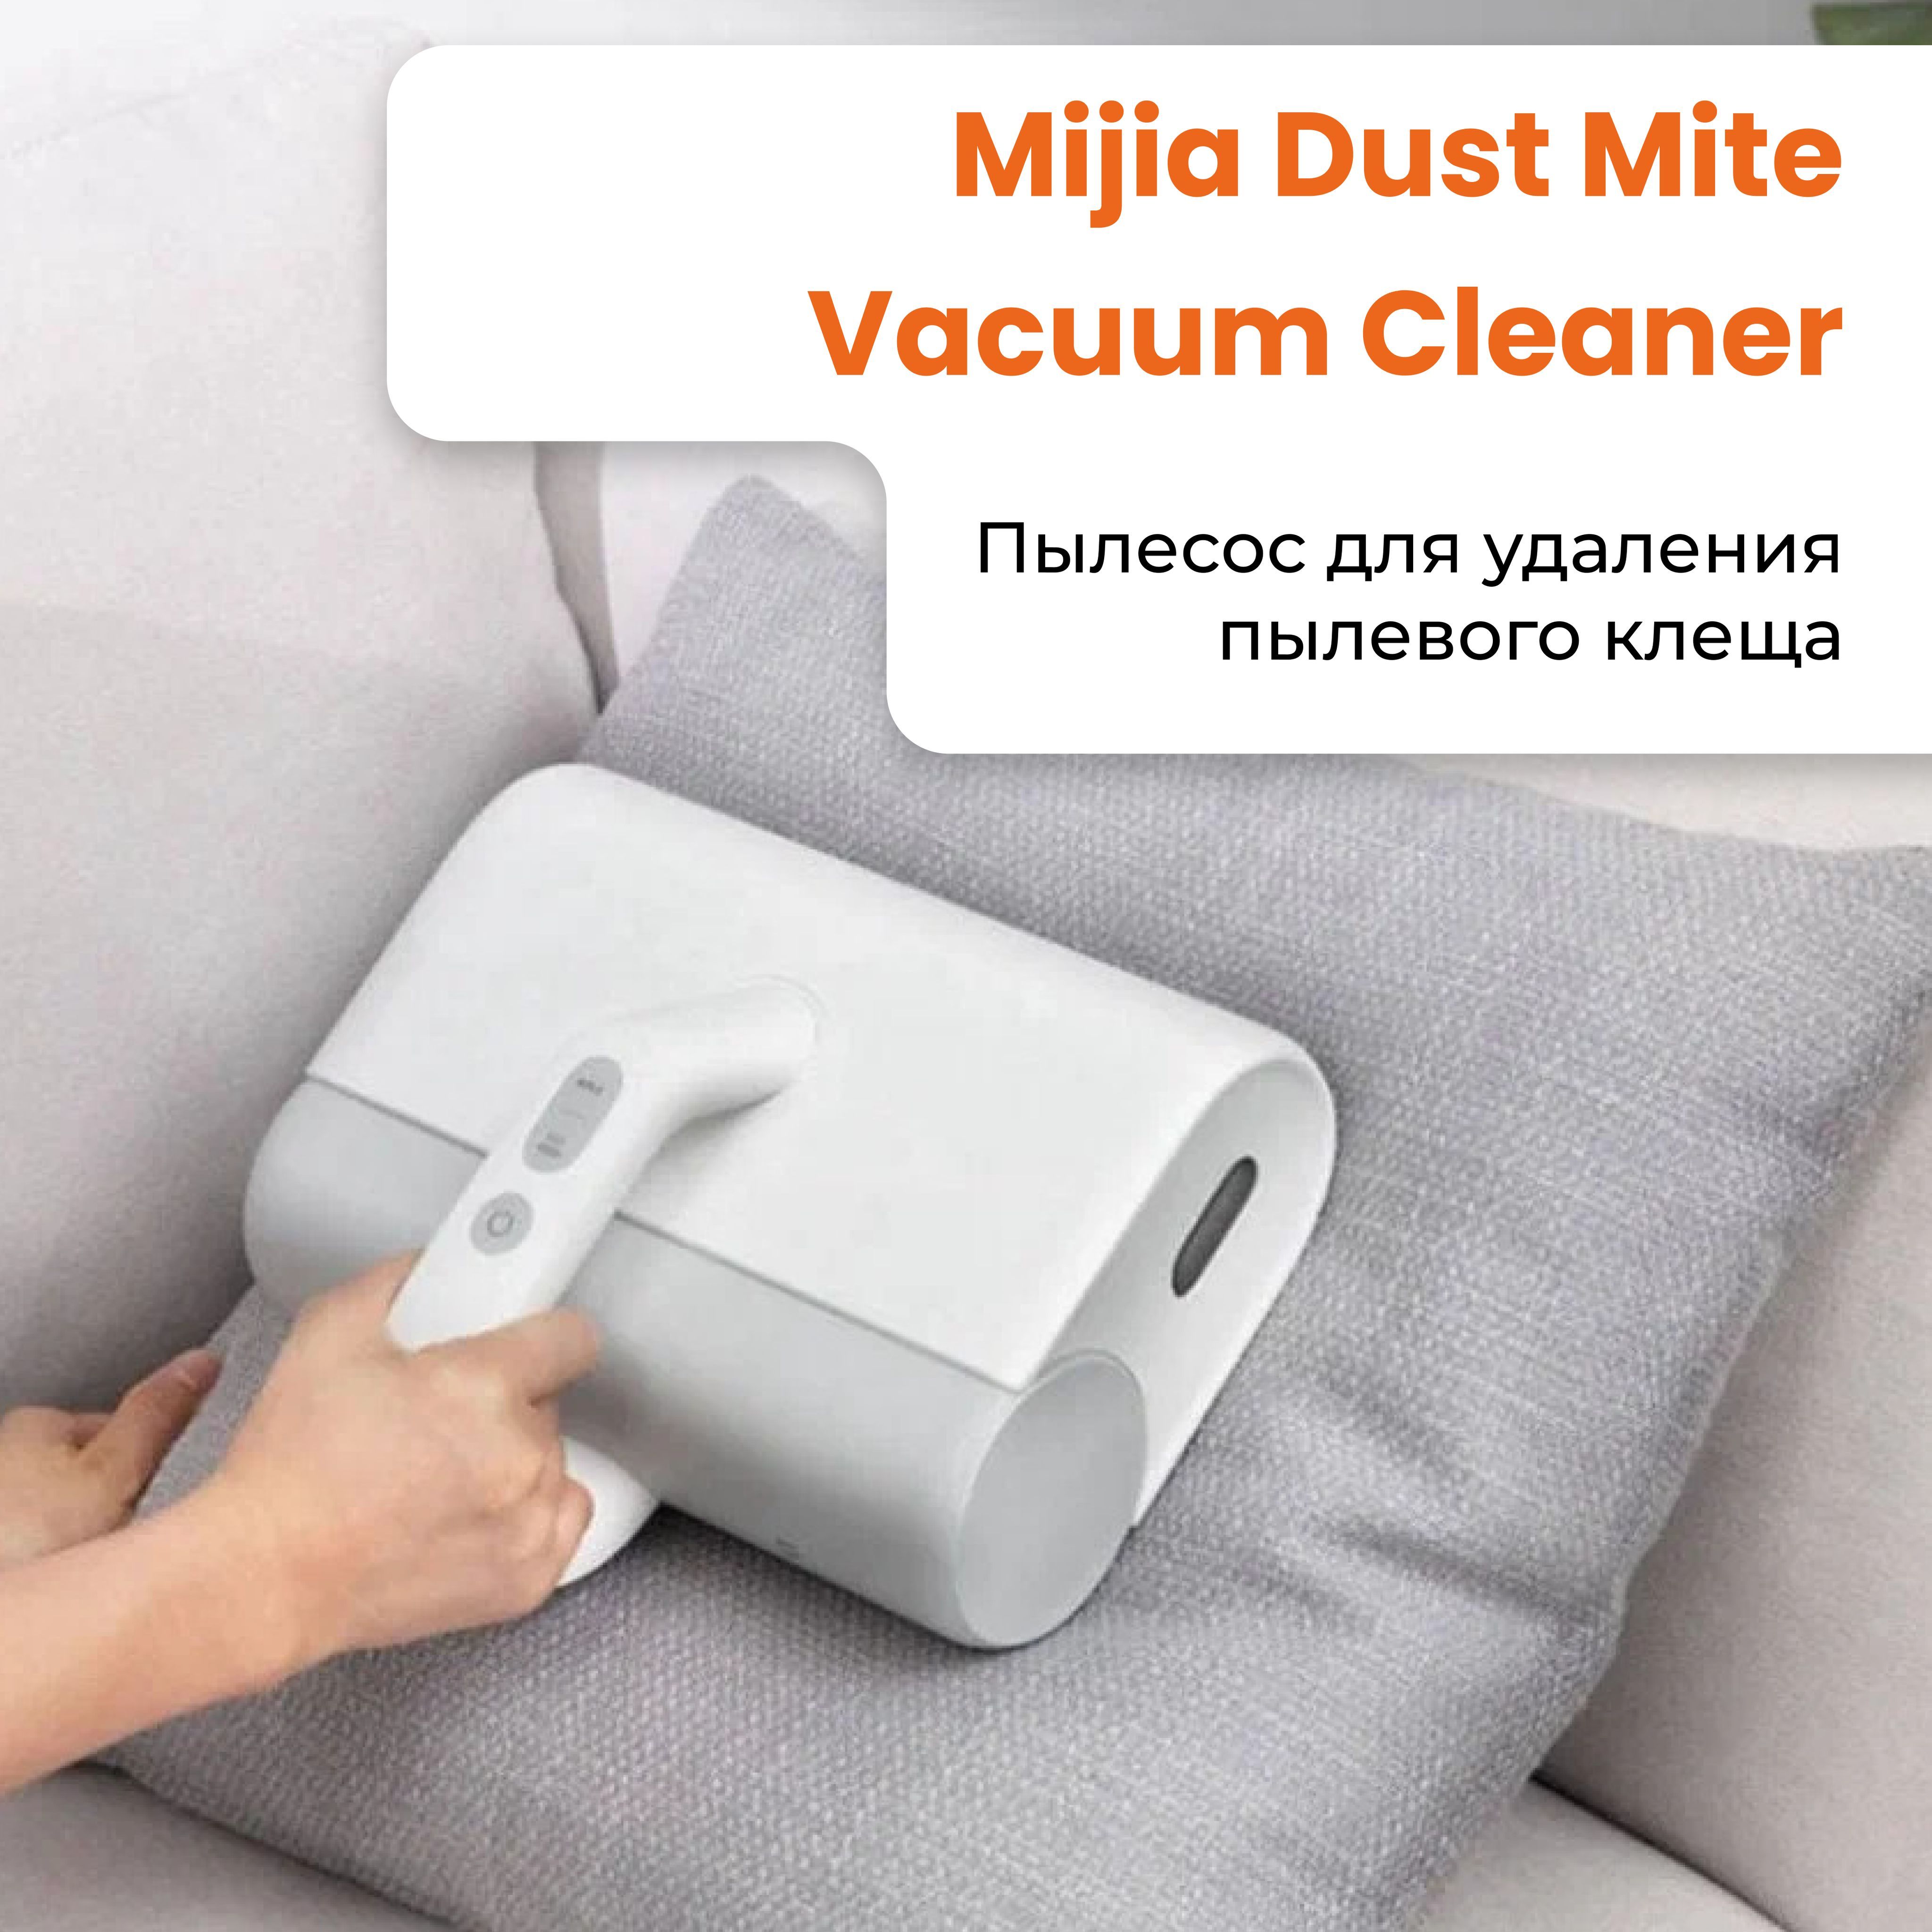 Xiaomi vacuum cleaner mjcmy01dy. Xiaomi mjcmy01dy. Пылесос Xiaomi (mjcmy01dy). Xiaomi Dust Mite Vacuum. Xiaomi Dust Mite Vacuum вилка.